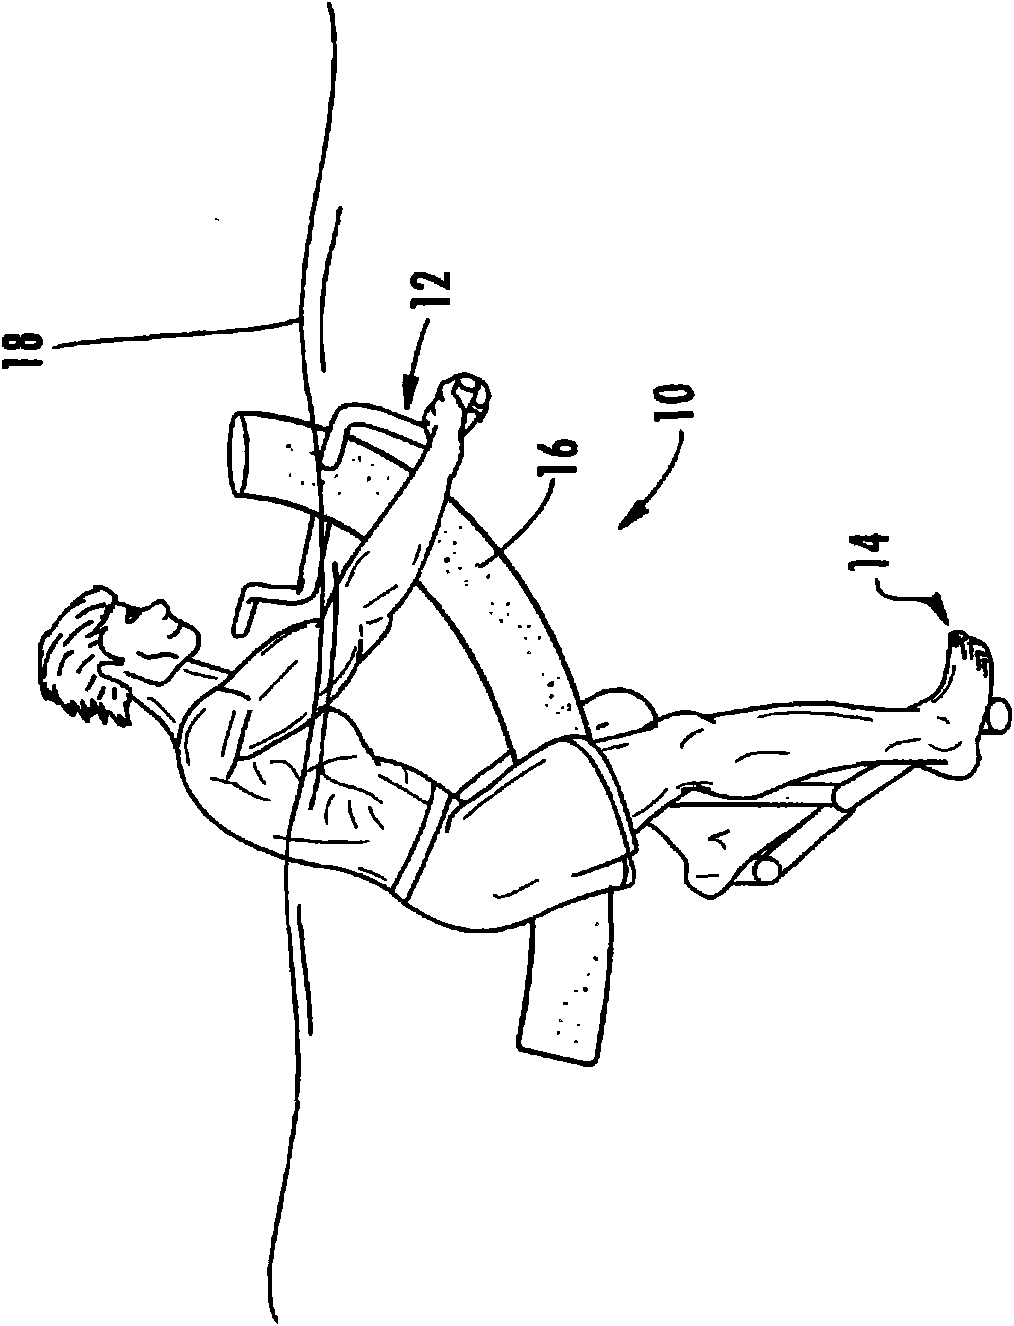 Exercise kit for personal floatation device